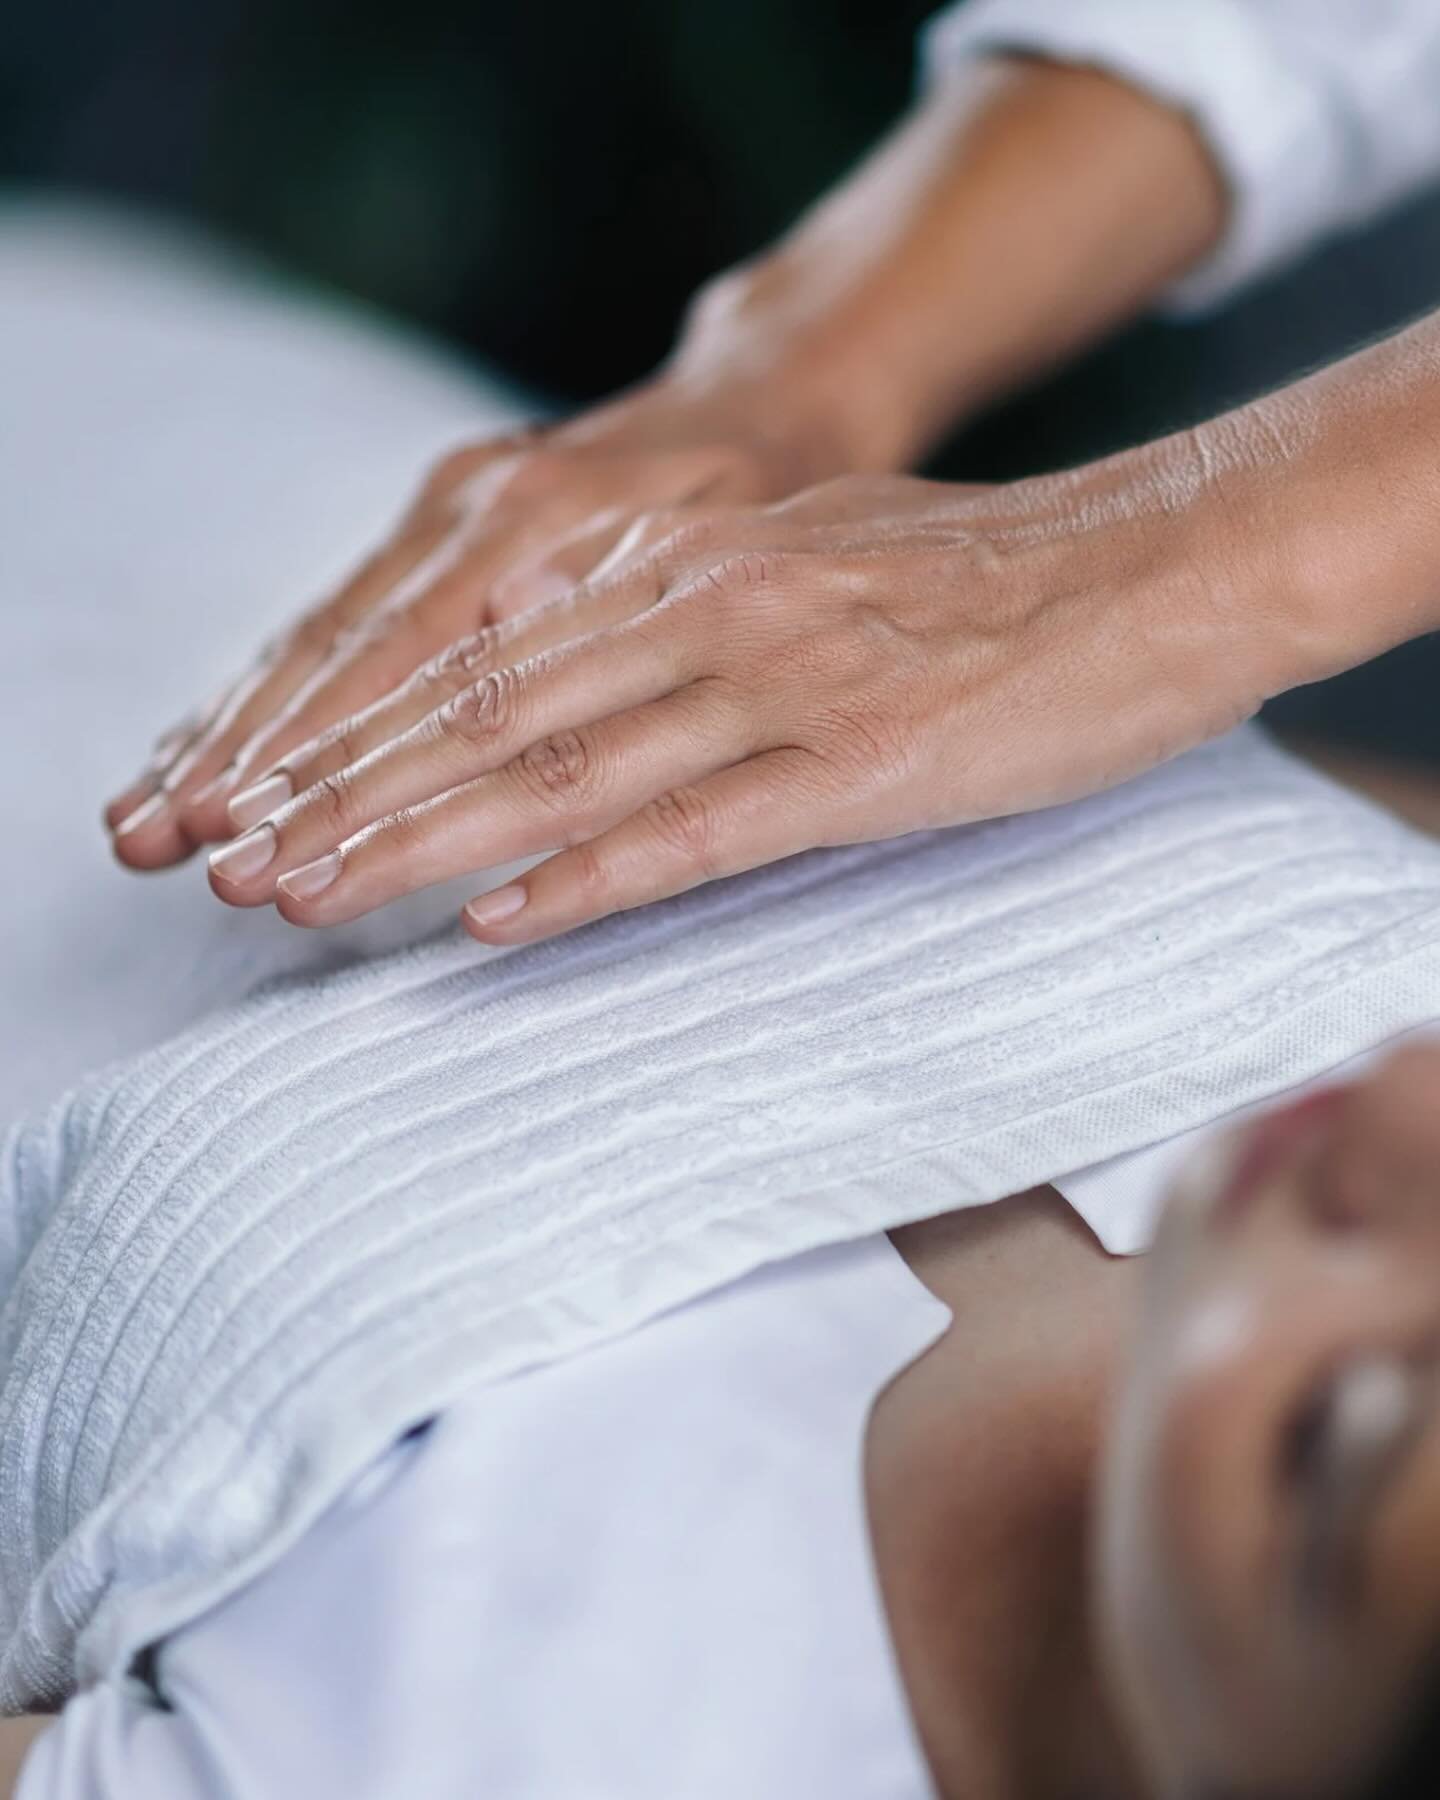 *NEW REIKI TRAINING!* Saturday, June 8 + Sunday, June 9 with Jindati! ✨

Reiki, a Japanese word that often translates to universal life energy, involves using physical or energetic touch to guide energy in a way that promotes balance and healing. ⚖️
